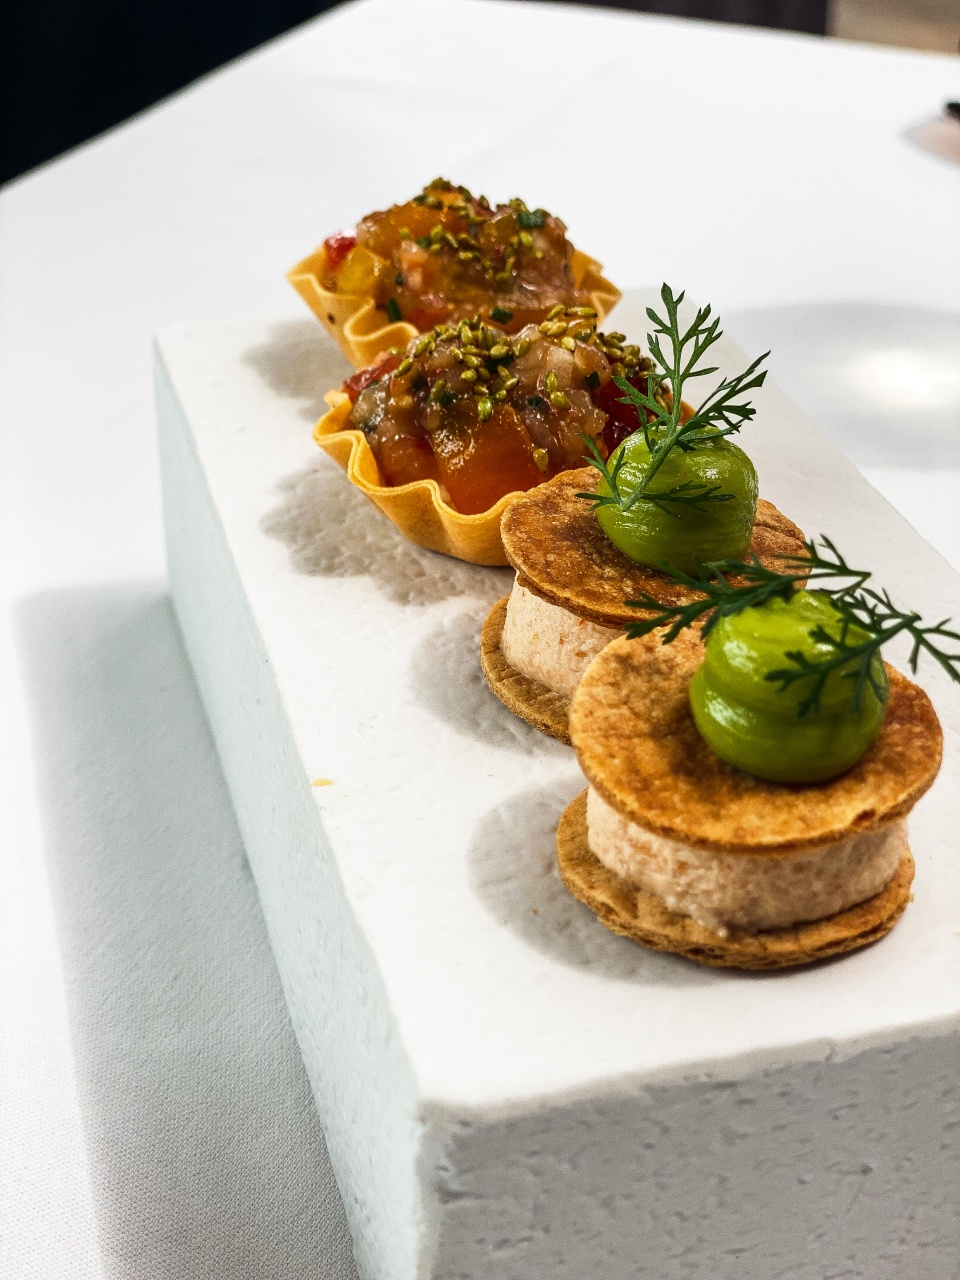 A beautiful presentation of refined appetizers on an elegant platter at De Bakermat restaurant, with each bite carefully prepared to offer a burst of flavor and texture.